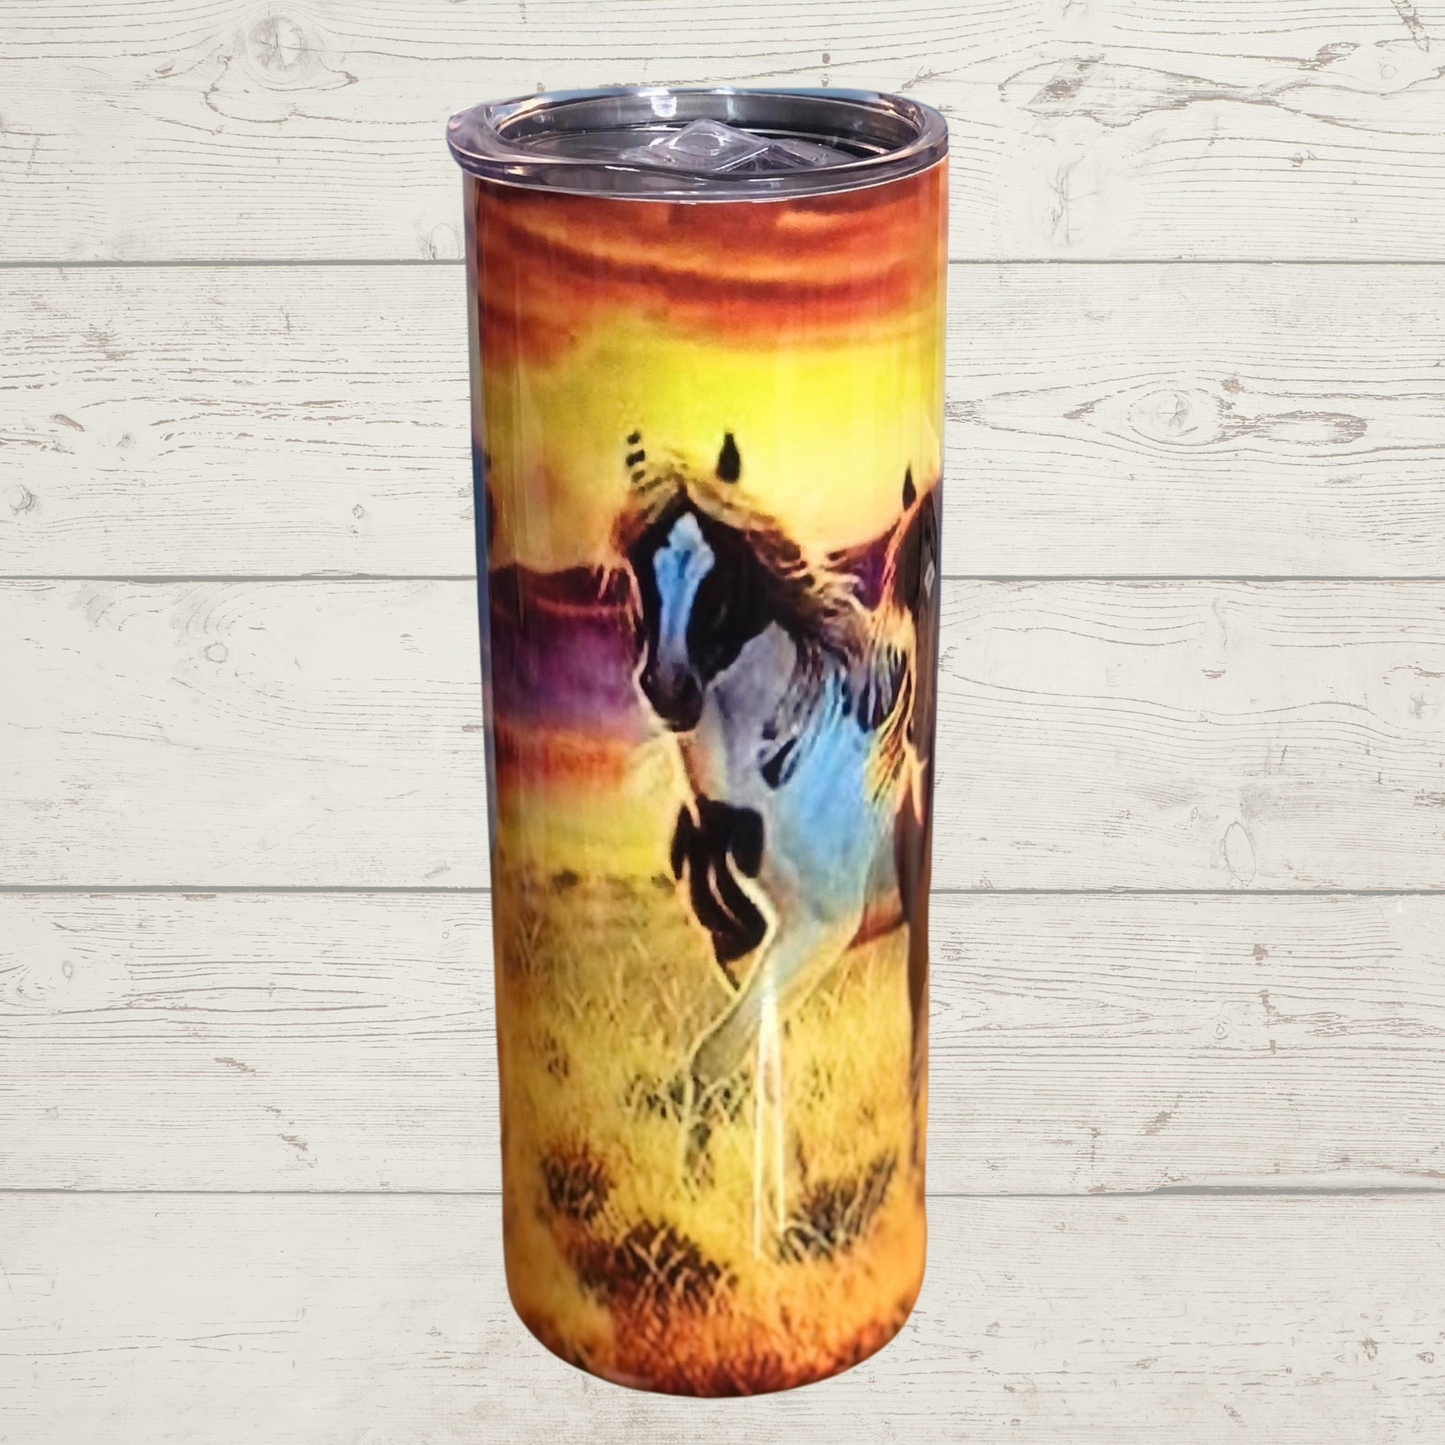 Wild Horses Running across open pasture with a Beautiful Sunset on the Horizon in the Background High Definition Image on a Quality 20 oz Skinny Sublimation Stainless Steel Tumbler/Mug/Cup with Lid and Straw